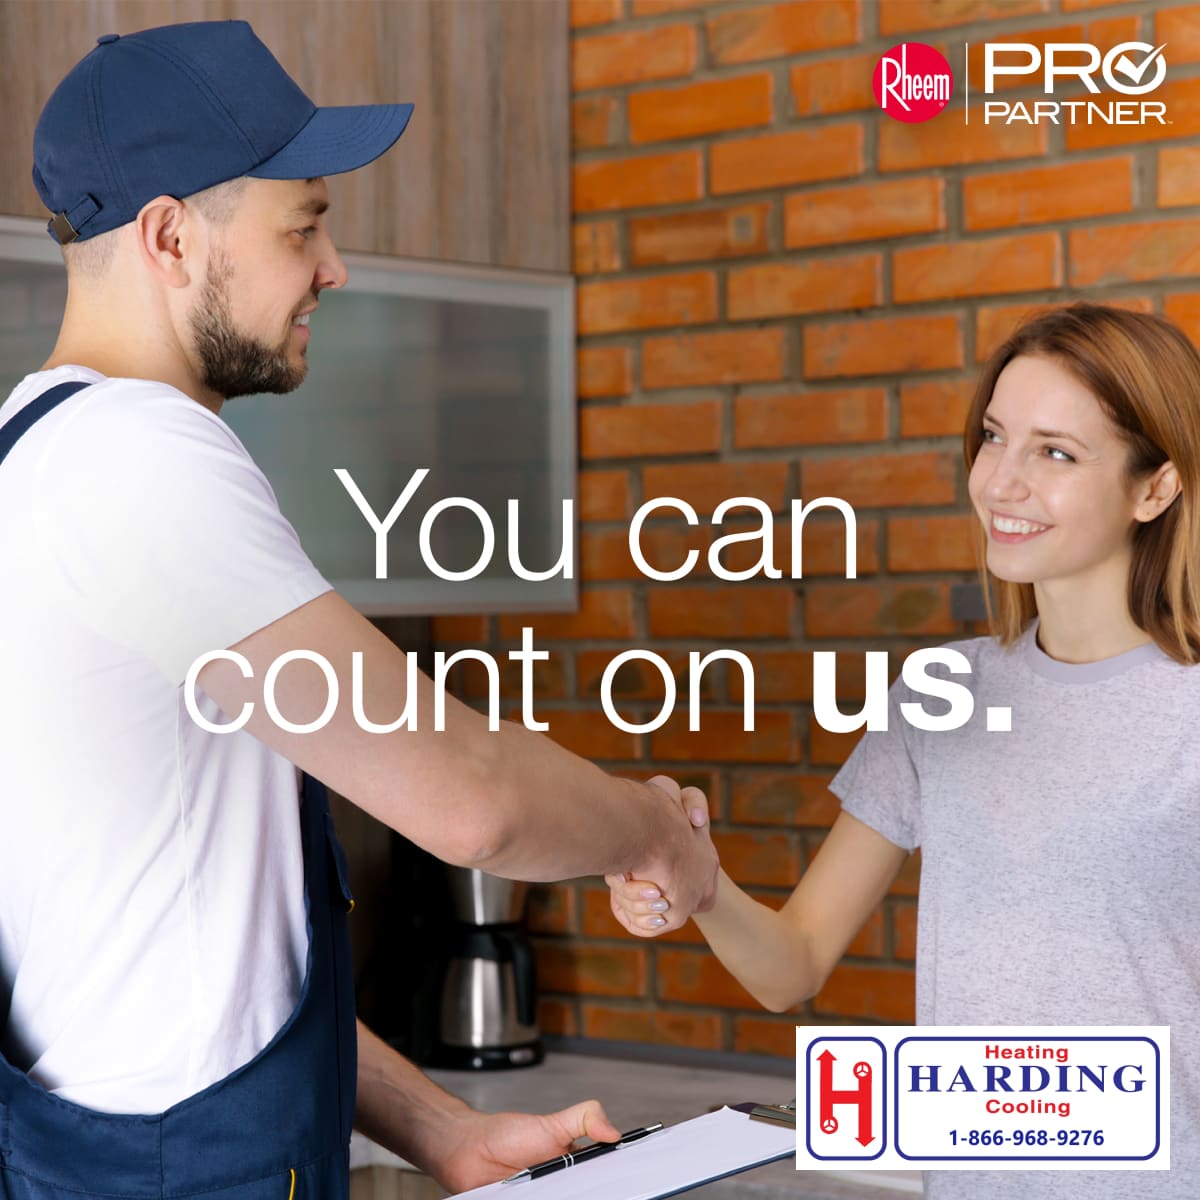 Harding Heating and Cooling